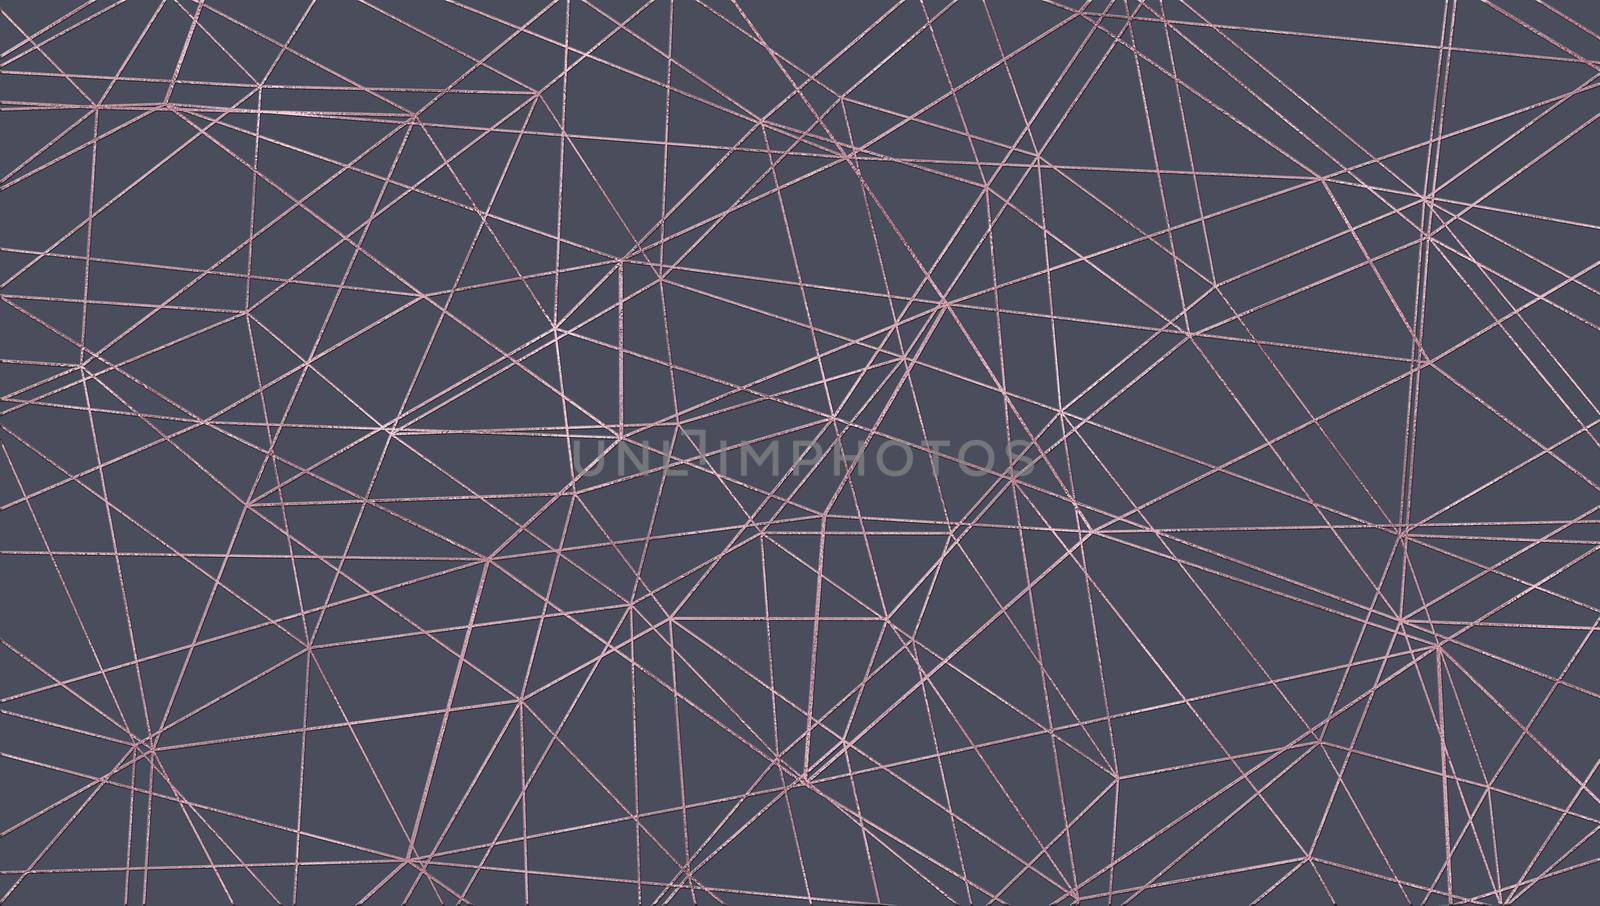 Abstract geometric design. Golden lines on grey background. Illustration